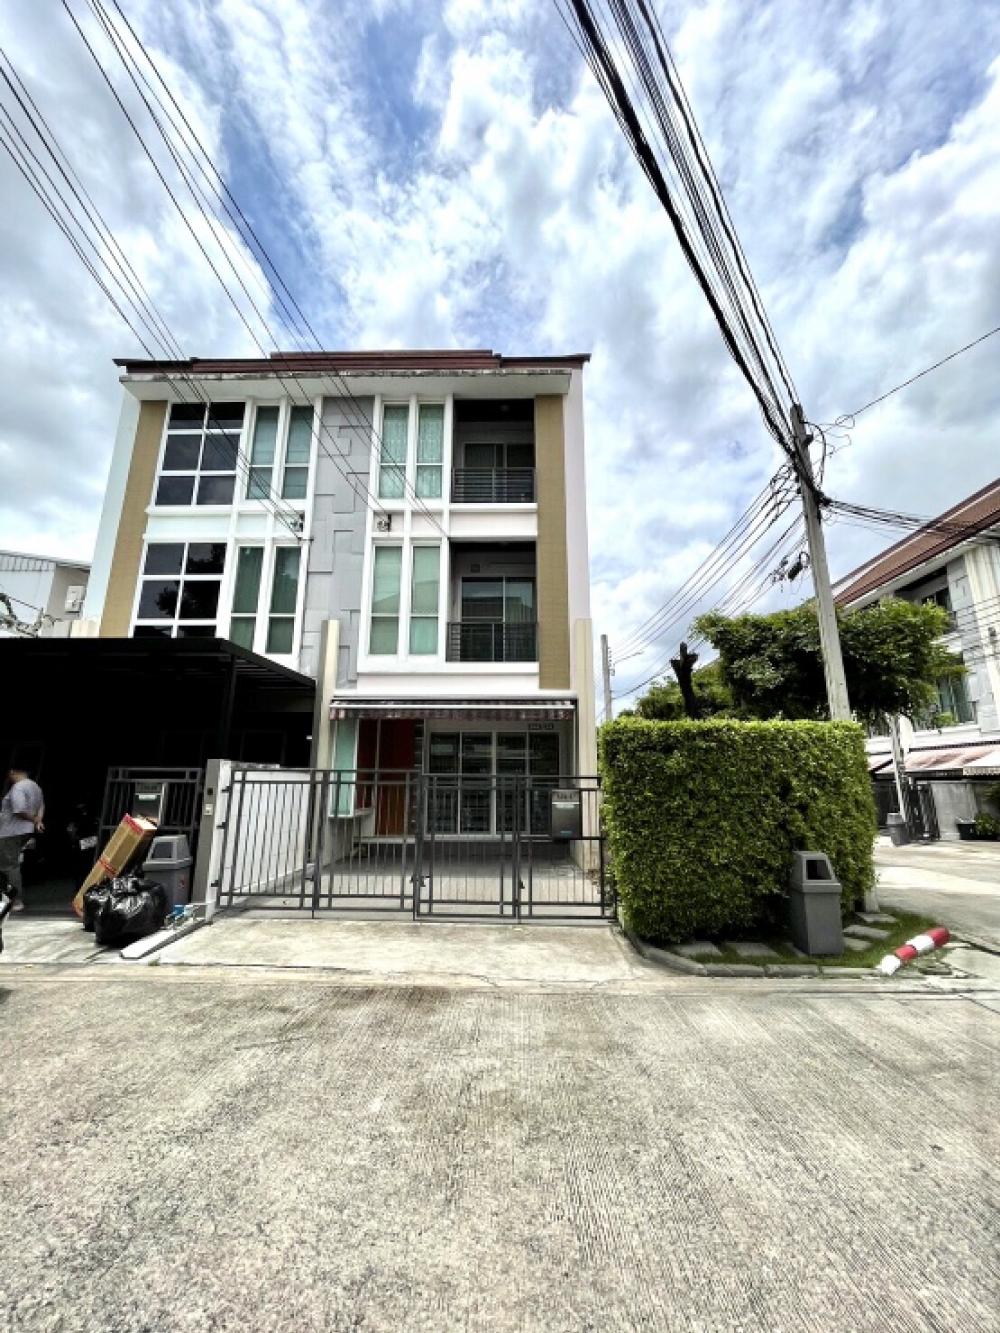 For SaleTownhouseRatchadapisek, Huaikwang, Suttisan : House for sale in the middle of the city, Ratchada 36, ​​Soi Suea Yai, 3-story townhome, corner house, private zone, has a side area 5 meters wide, size 29.6 sq m, 165 sq m, parking for 2 cars, 3 bedrooms, 3 bathrooms, 1 kitchen, ready to move in, near Ma